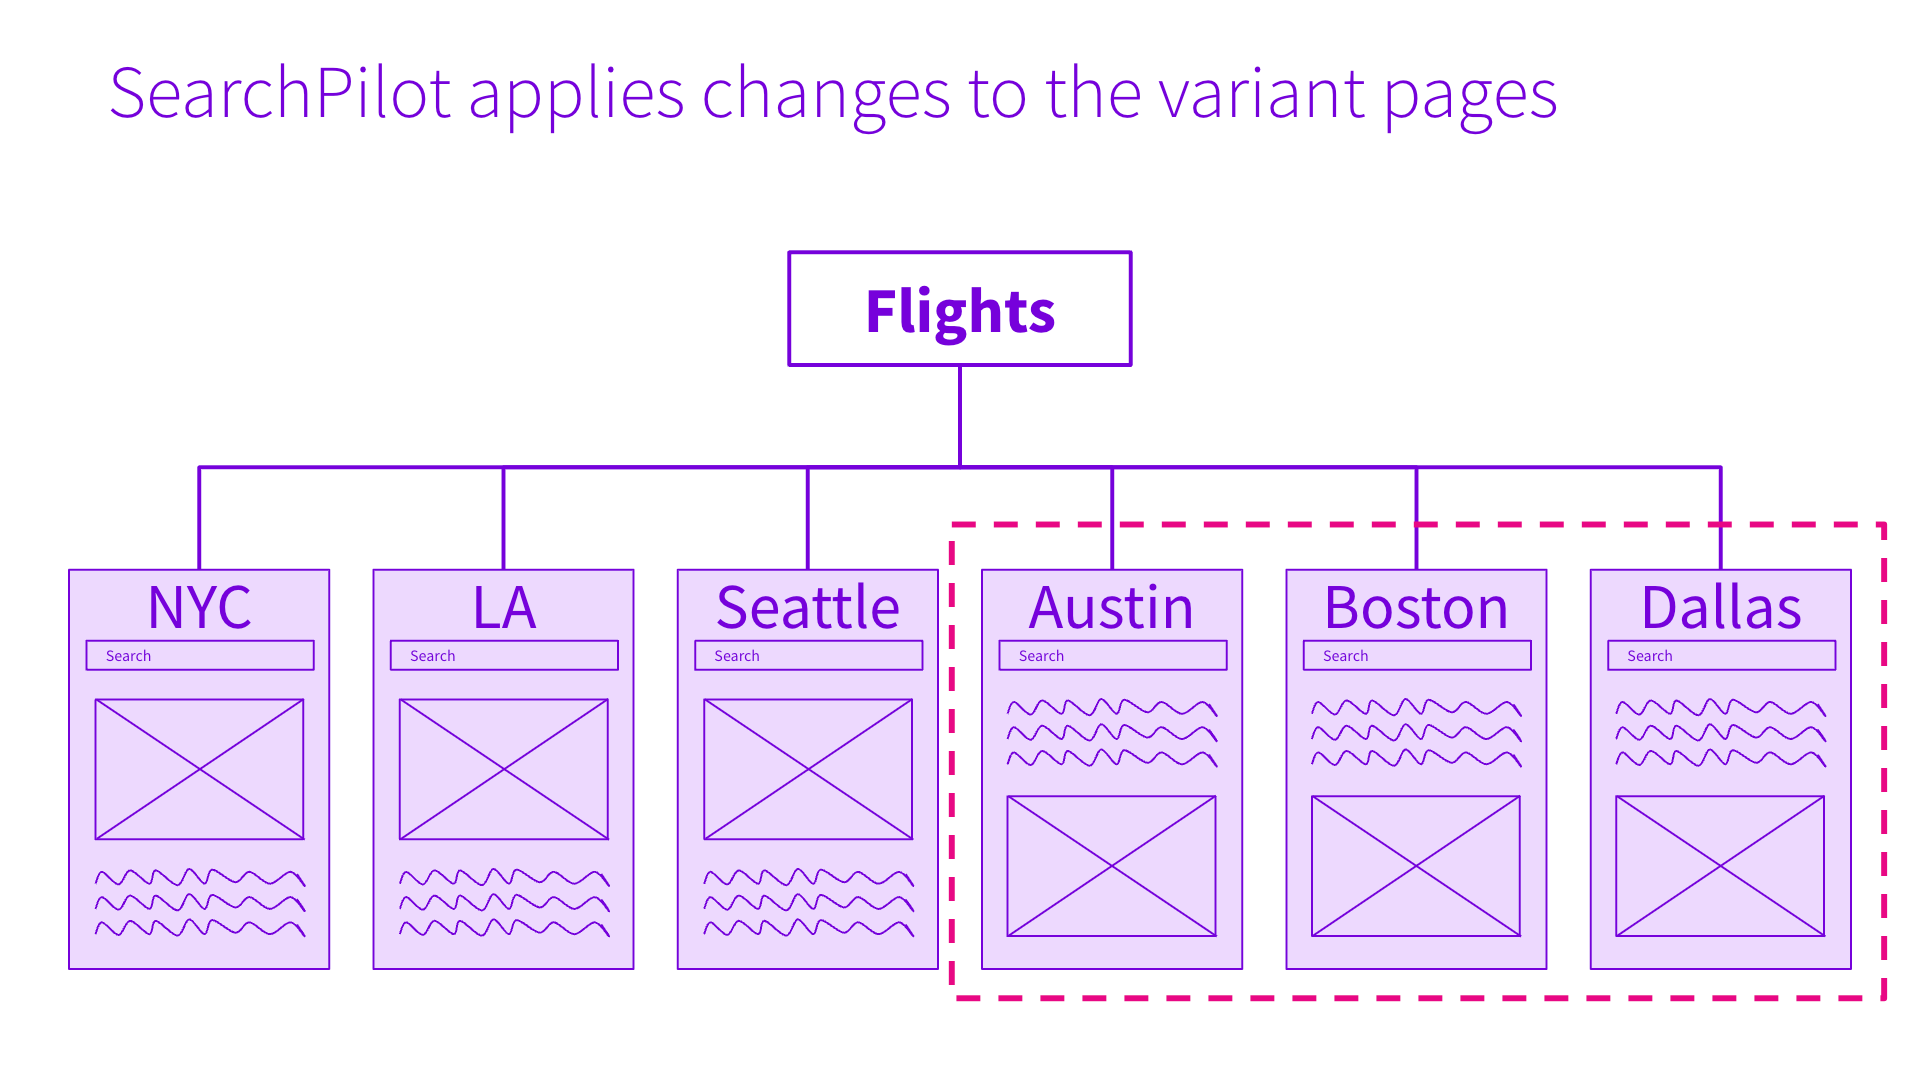 SearchPilot applies changes to the variant pages